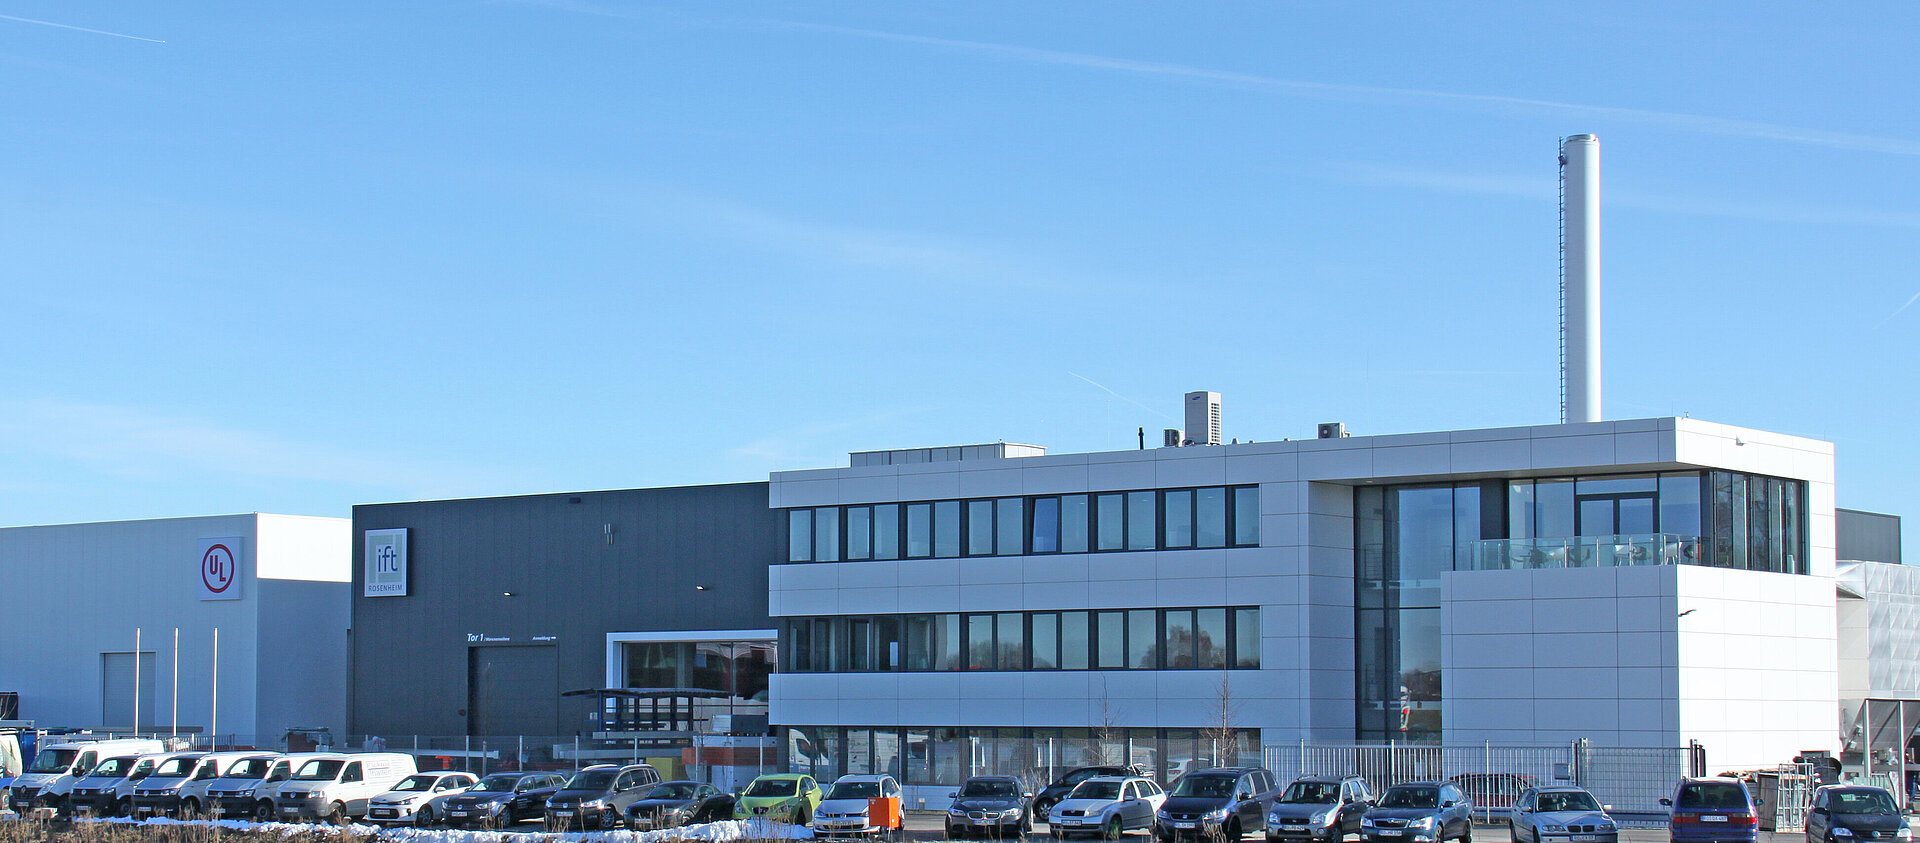 The picture shows an industrial building against a blue sky. It is the ift Technology Centre